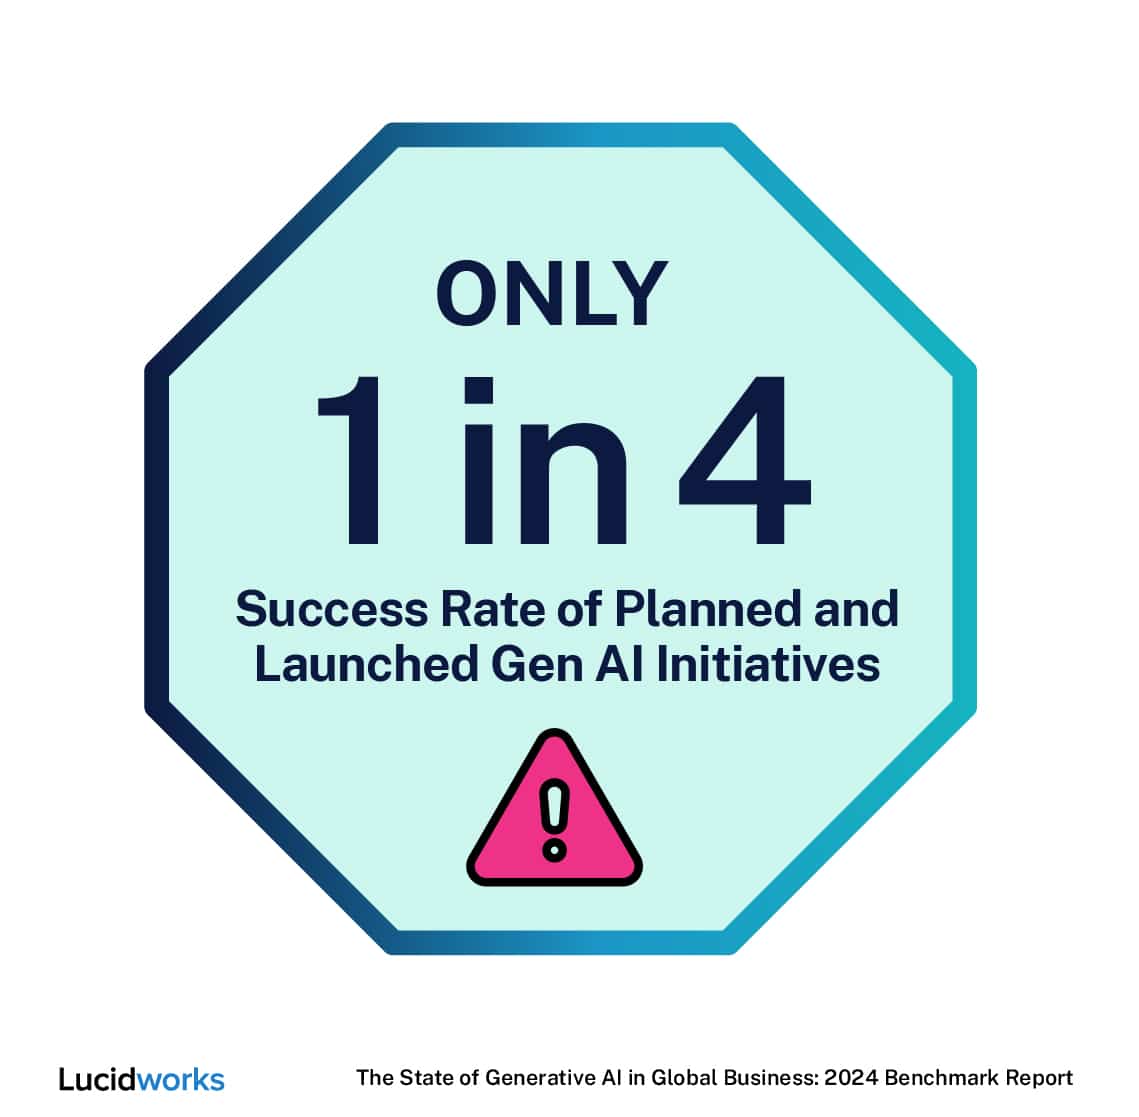 A Lucidworks graphic shows that only 1 in 4 planned or launched generative AI initiatives are successful, according to their 2024 Benchmark Report on the state of Generative AI in global businesses.